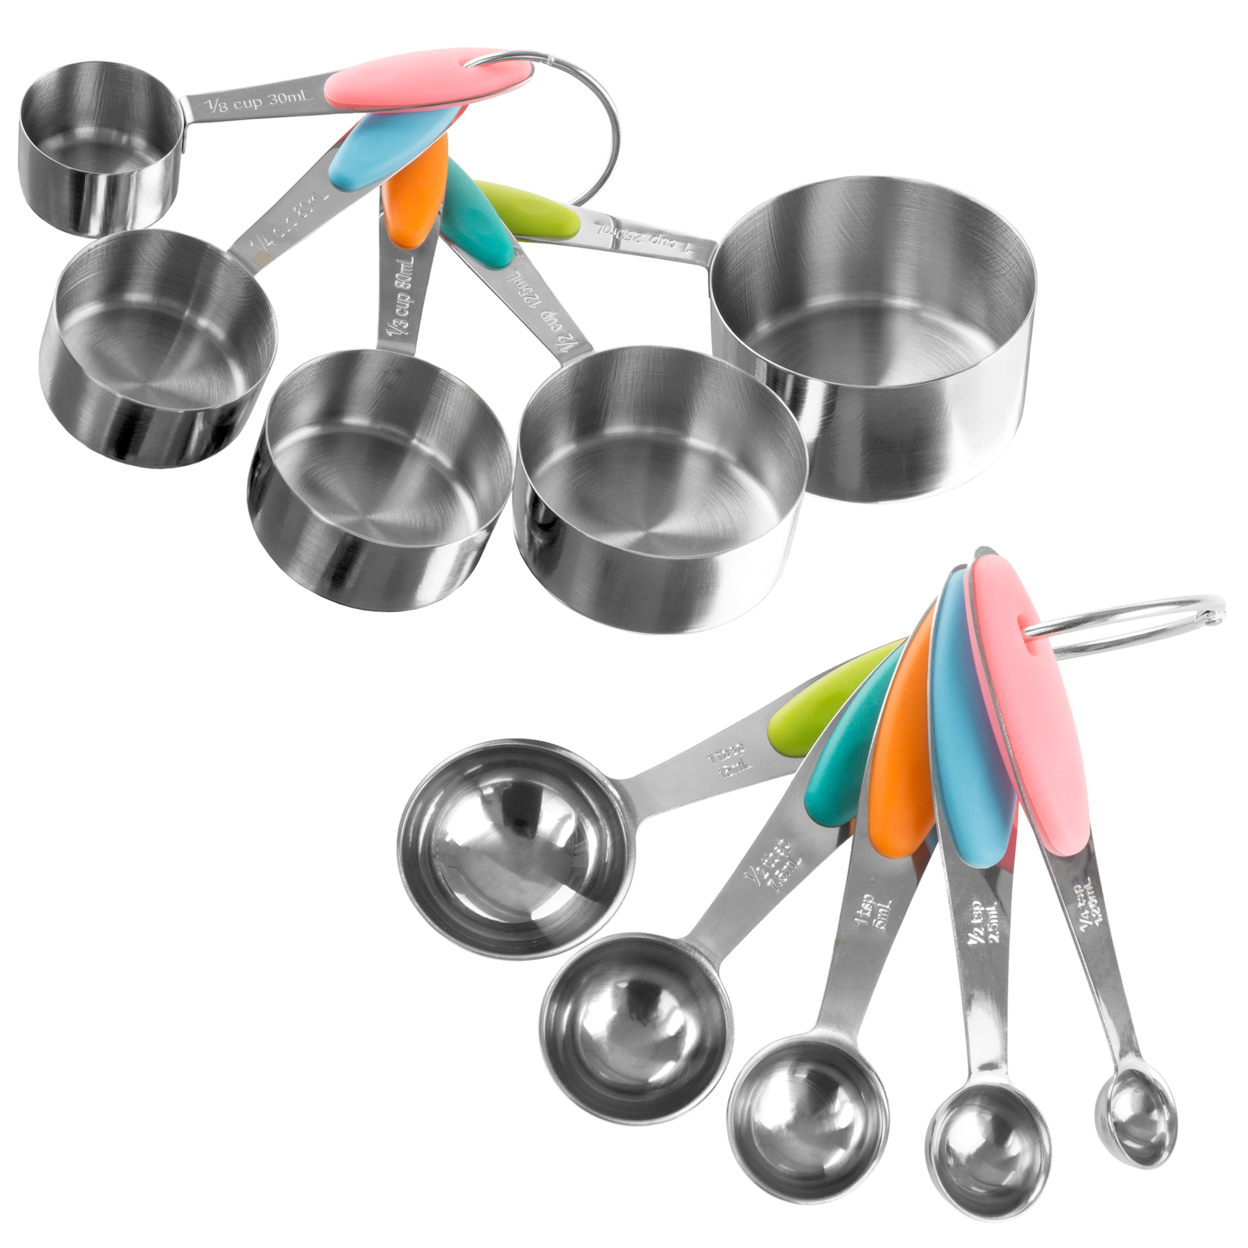 Measuring Cups And Spoons Matching Set Stainless Steel Silicone Handles Cups TBSP And Metric